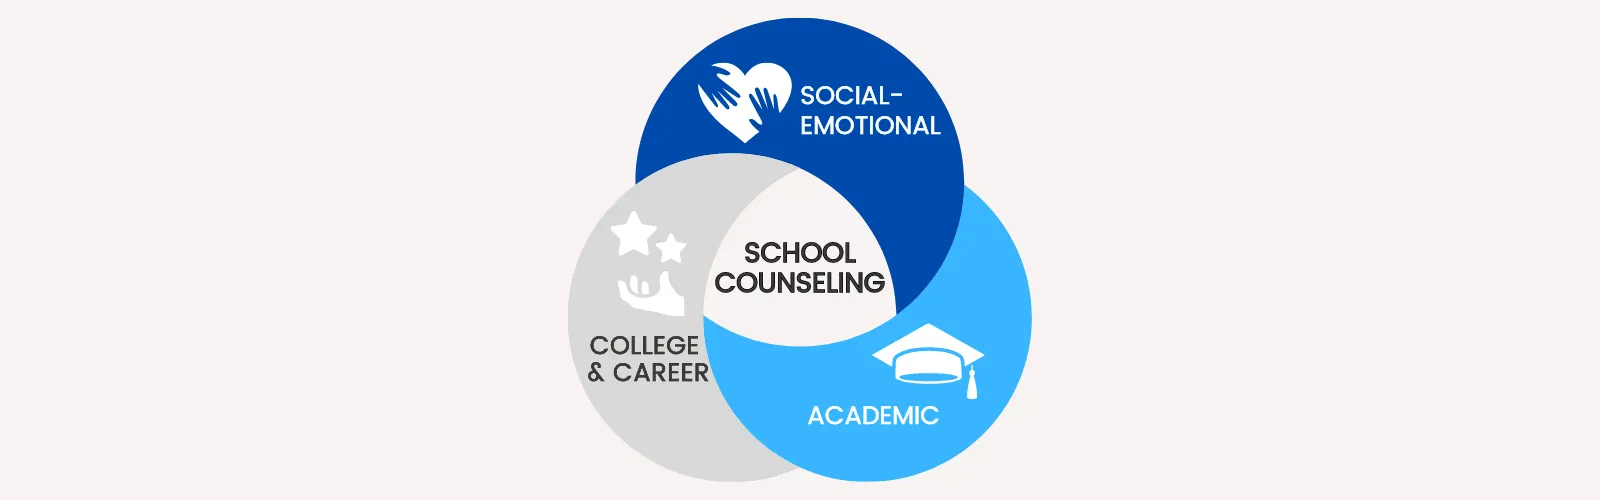 Venn Diagram showing School Counseling in the middle with Social-Emotional, Academic, and College and Career all intersecting in the middle